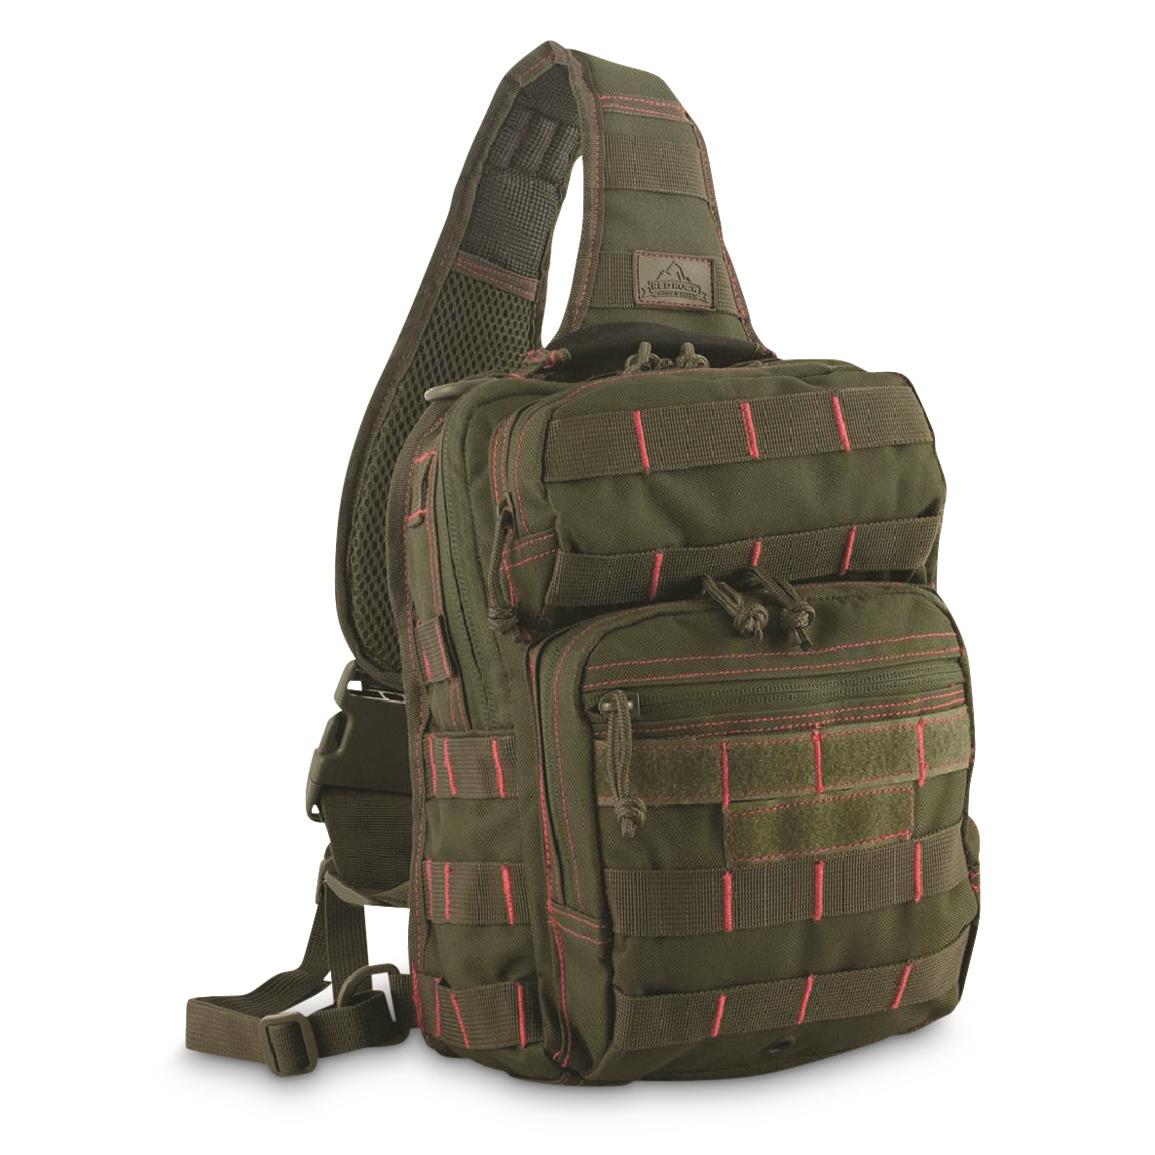 Red Rock Outdoor Gear Rover Large Sling Bag, Od/red